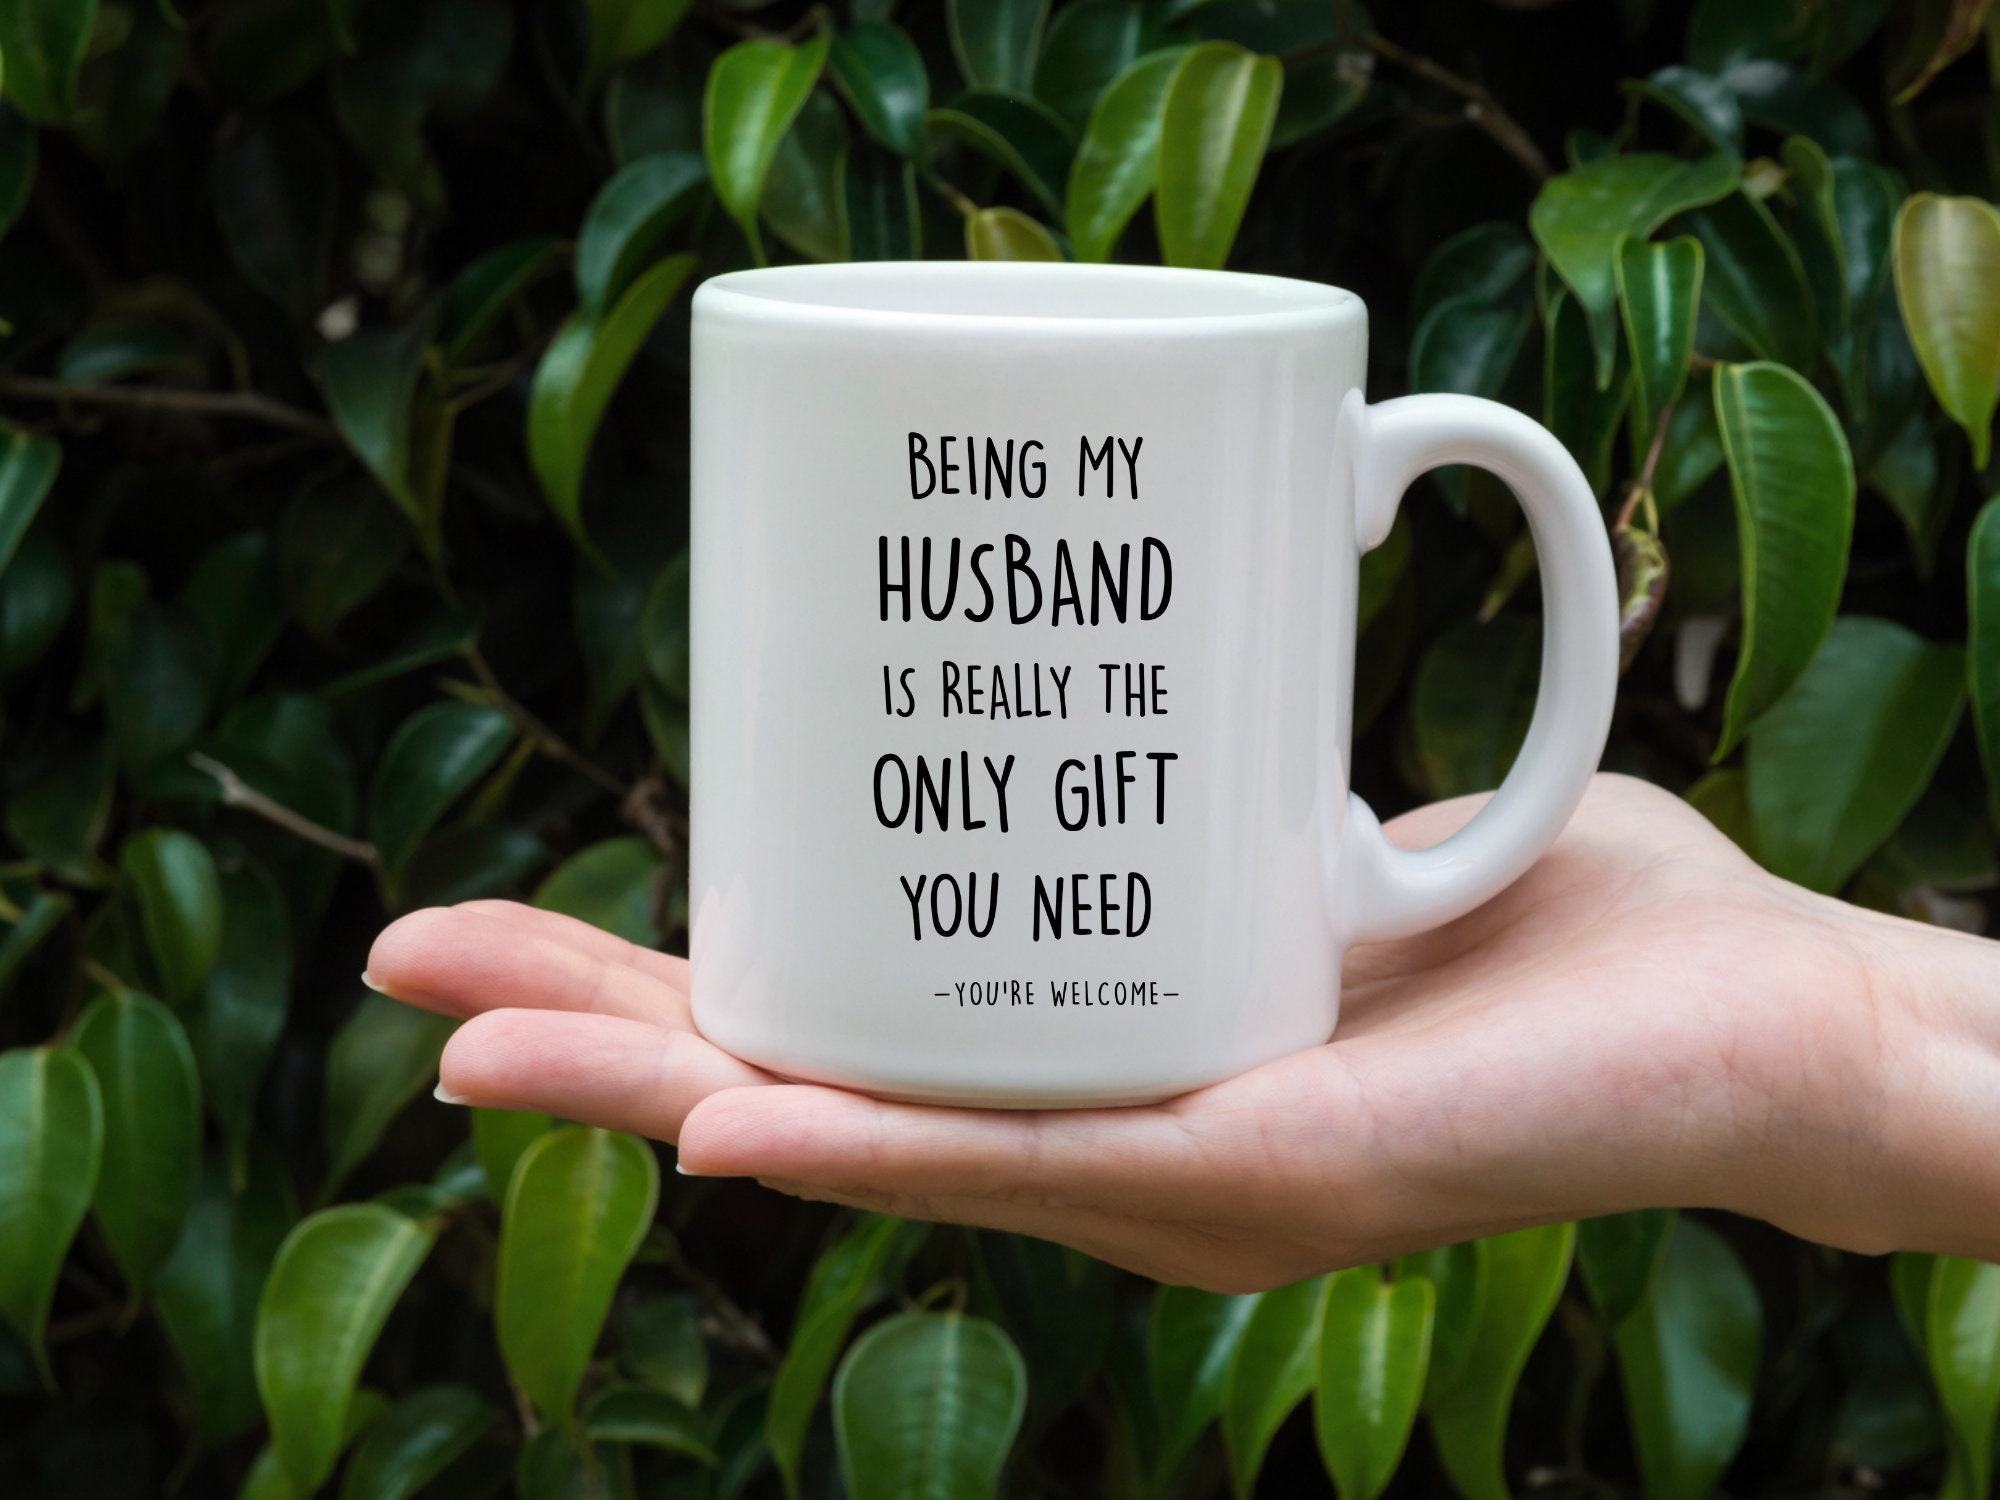 Being my Husband Is Really The Only Gift You Need Mug, Husband Gifts,  Husband Mugs, Funny Husband Mugs, Best Gift For Husband